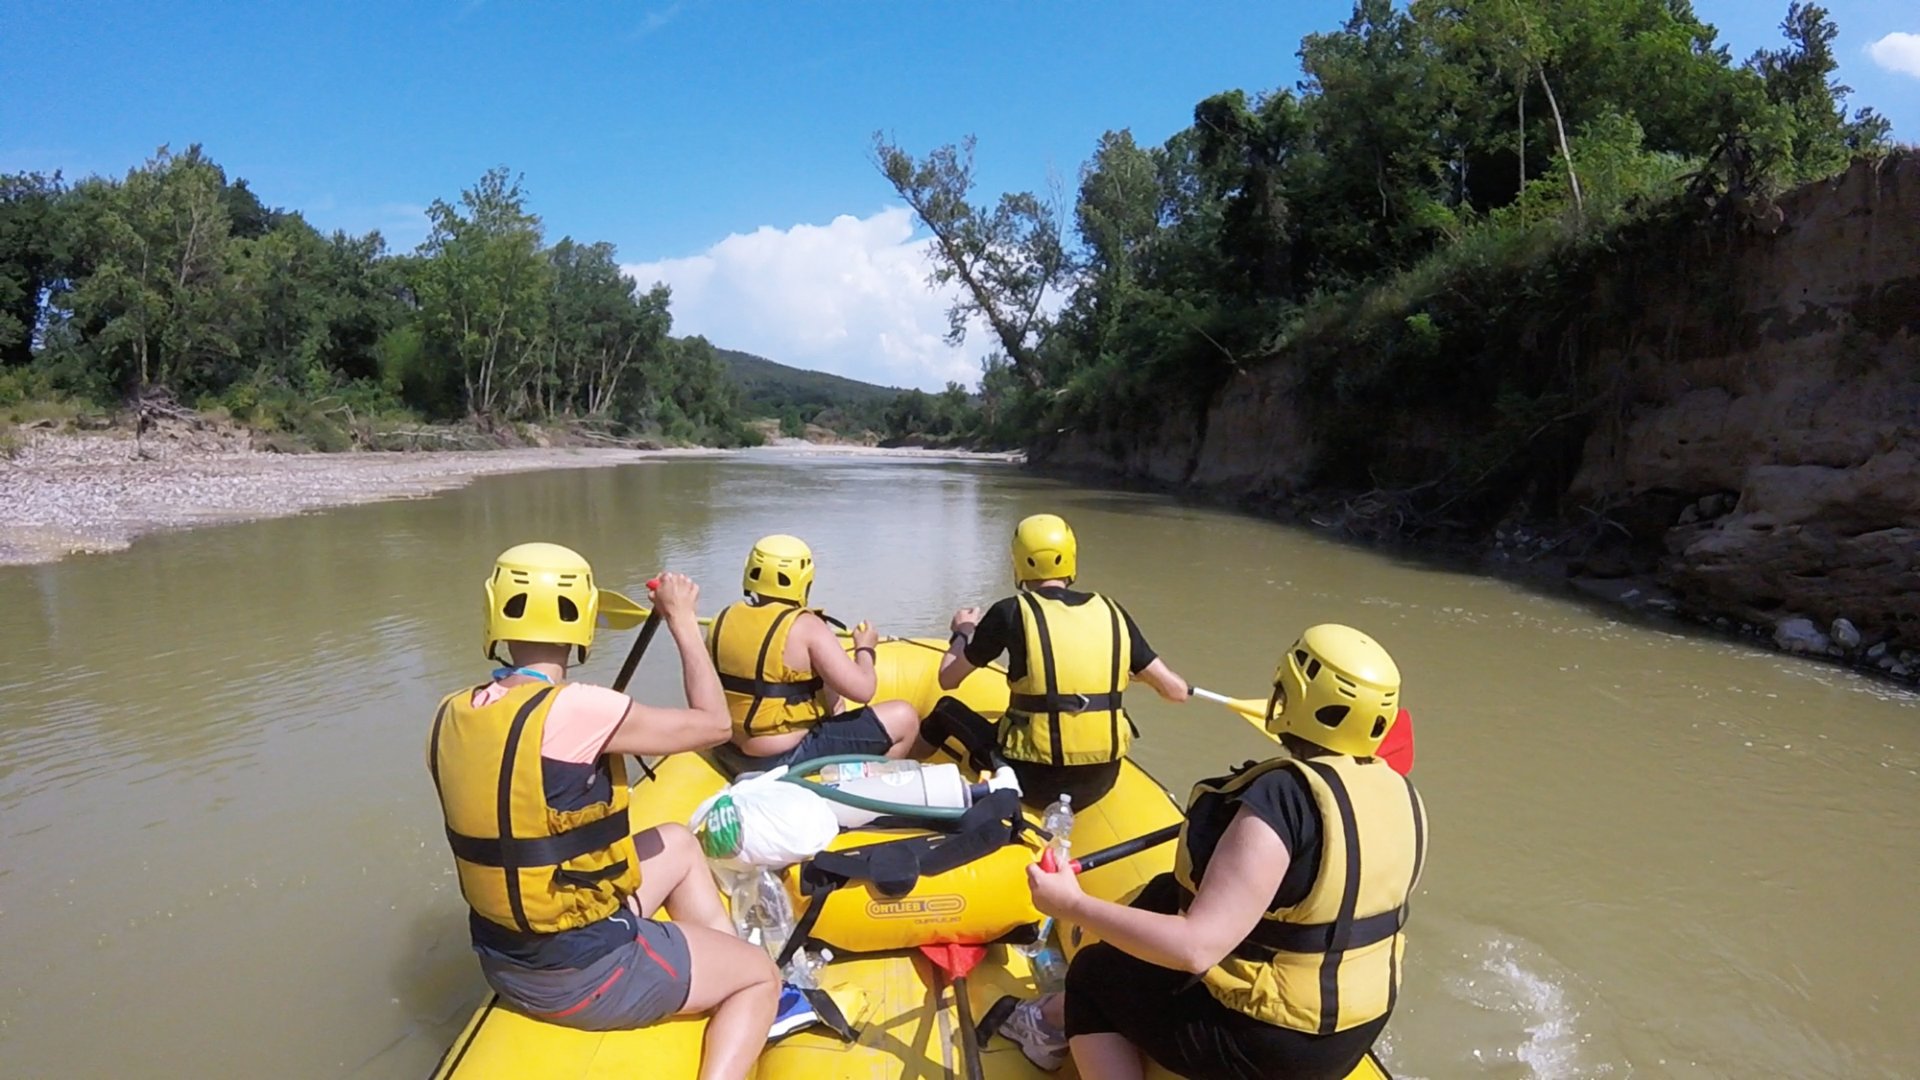 Rafting nel fiume Ombrone